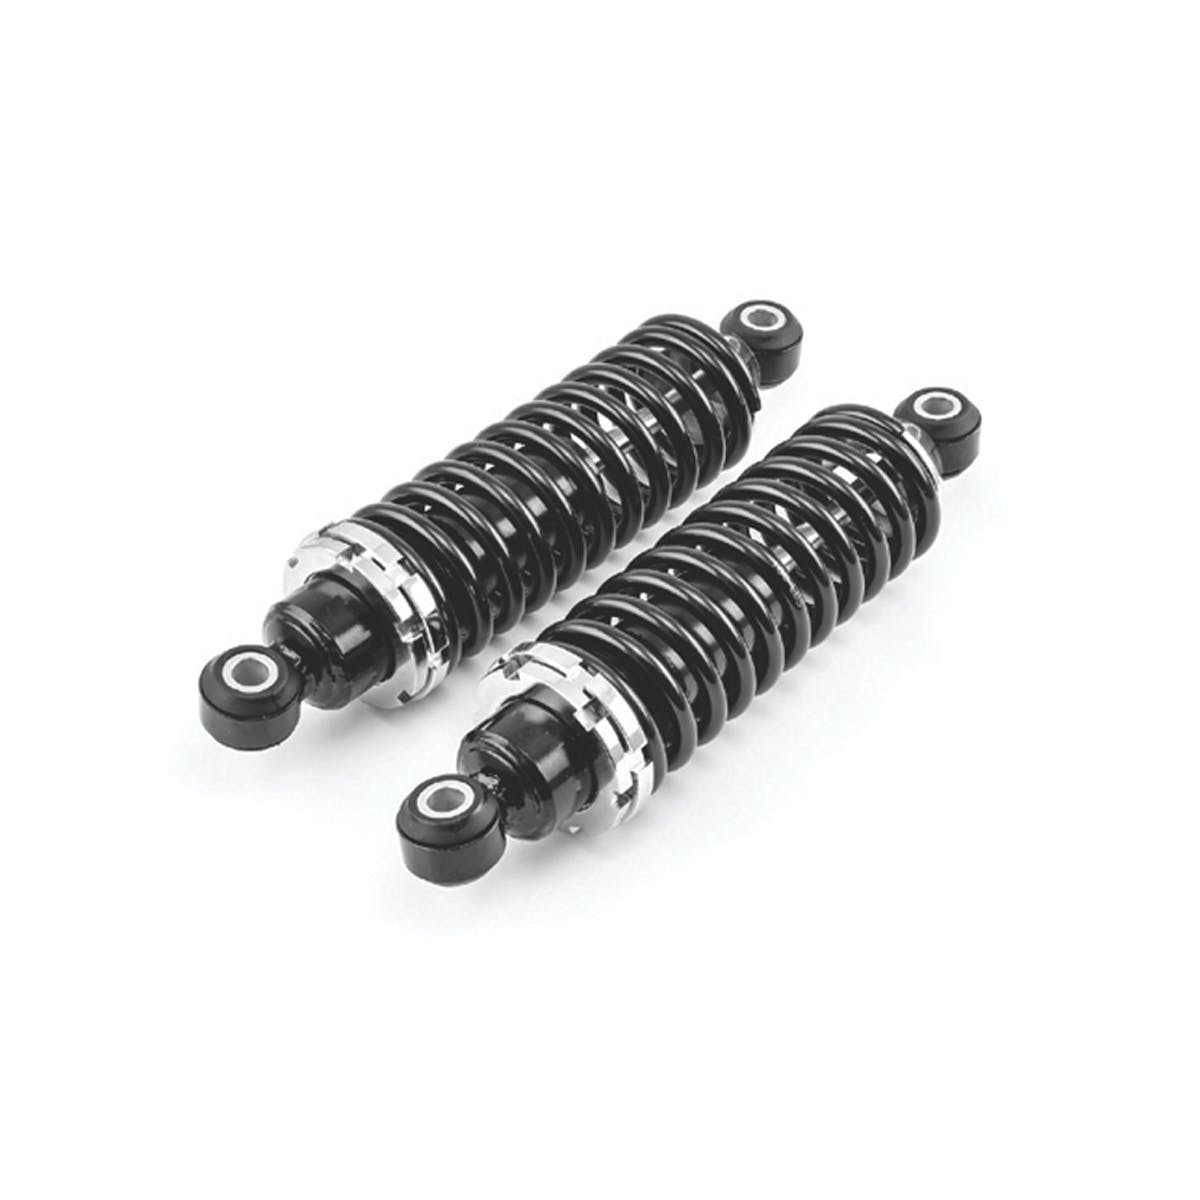 Speedmaster PCE494.1004 250 lbs/in Spring Rate 12 Coil Over Shock Assemblies Adjustable (Pair)